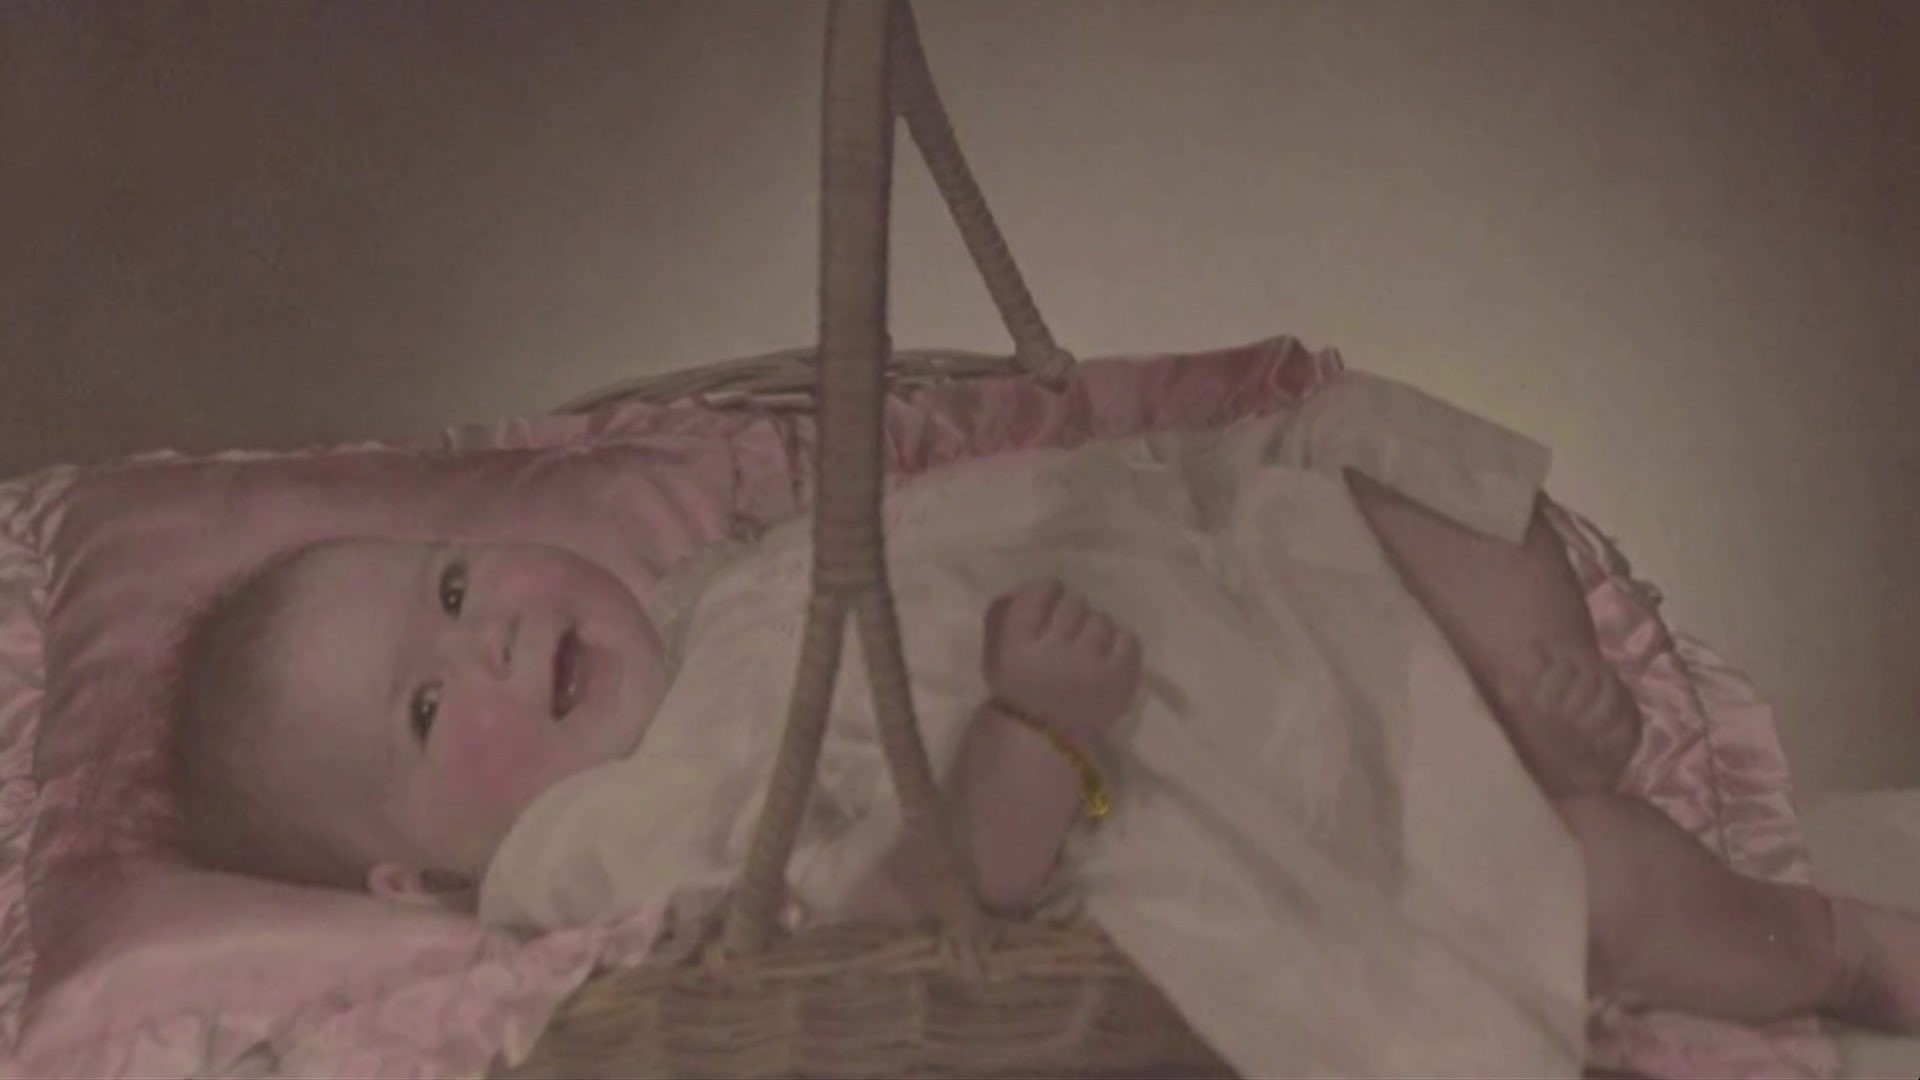 A baby lies in a basket.